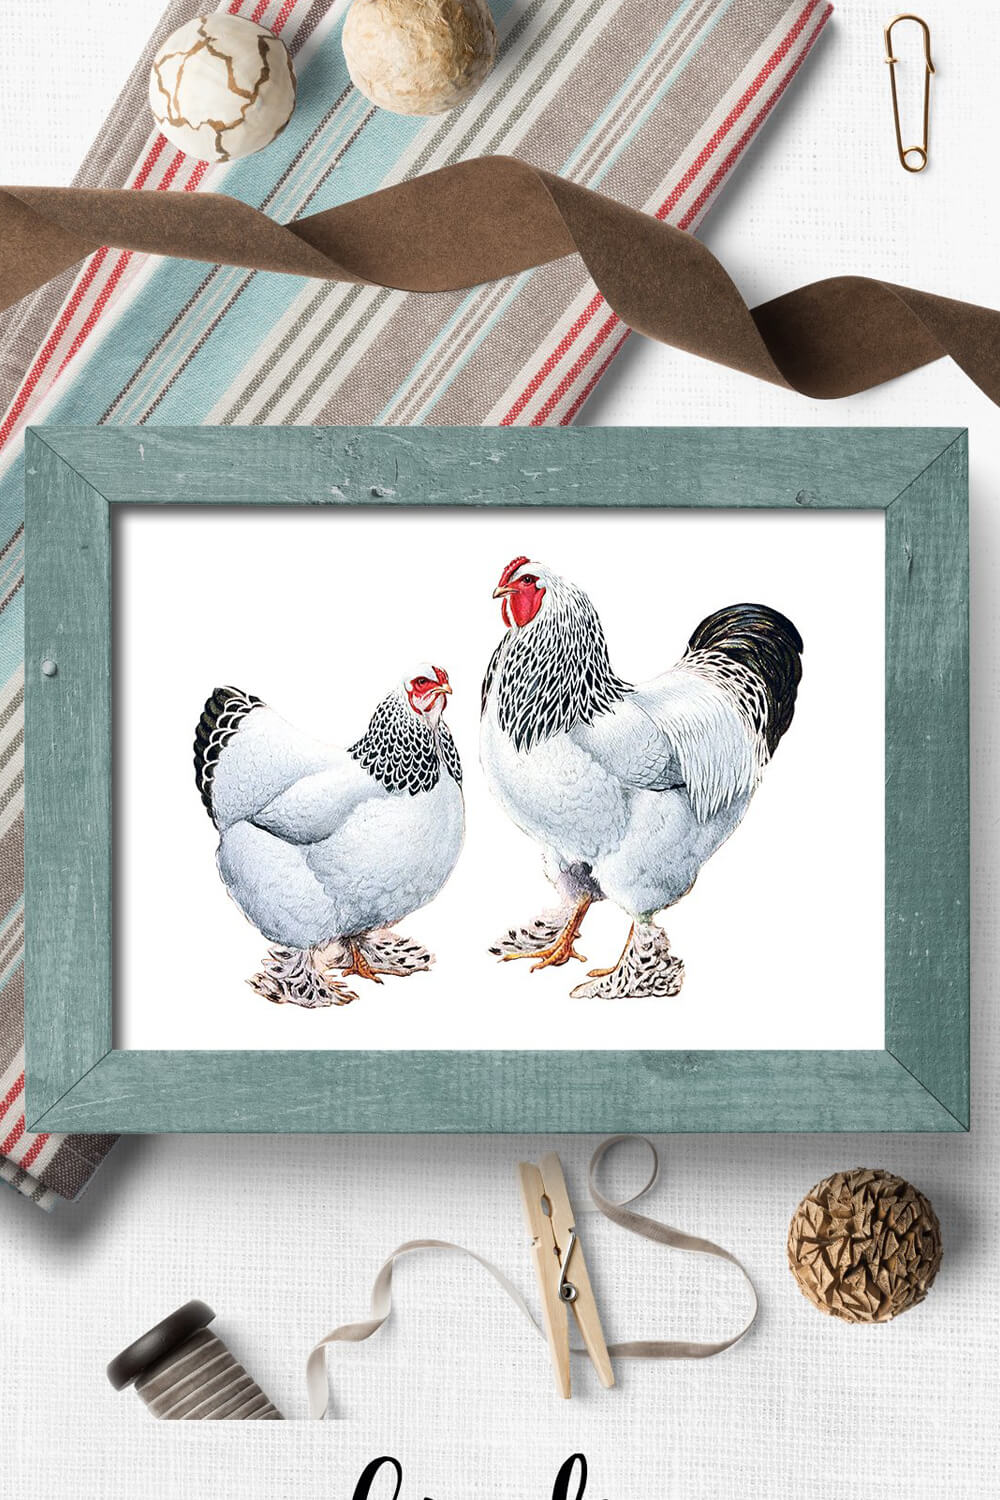 Drawing of a chicken with a rooster on white with a gray frame.